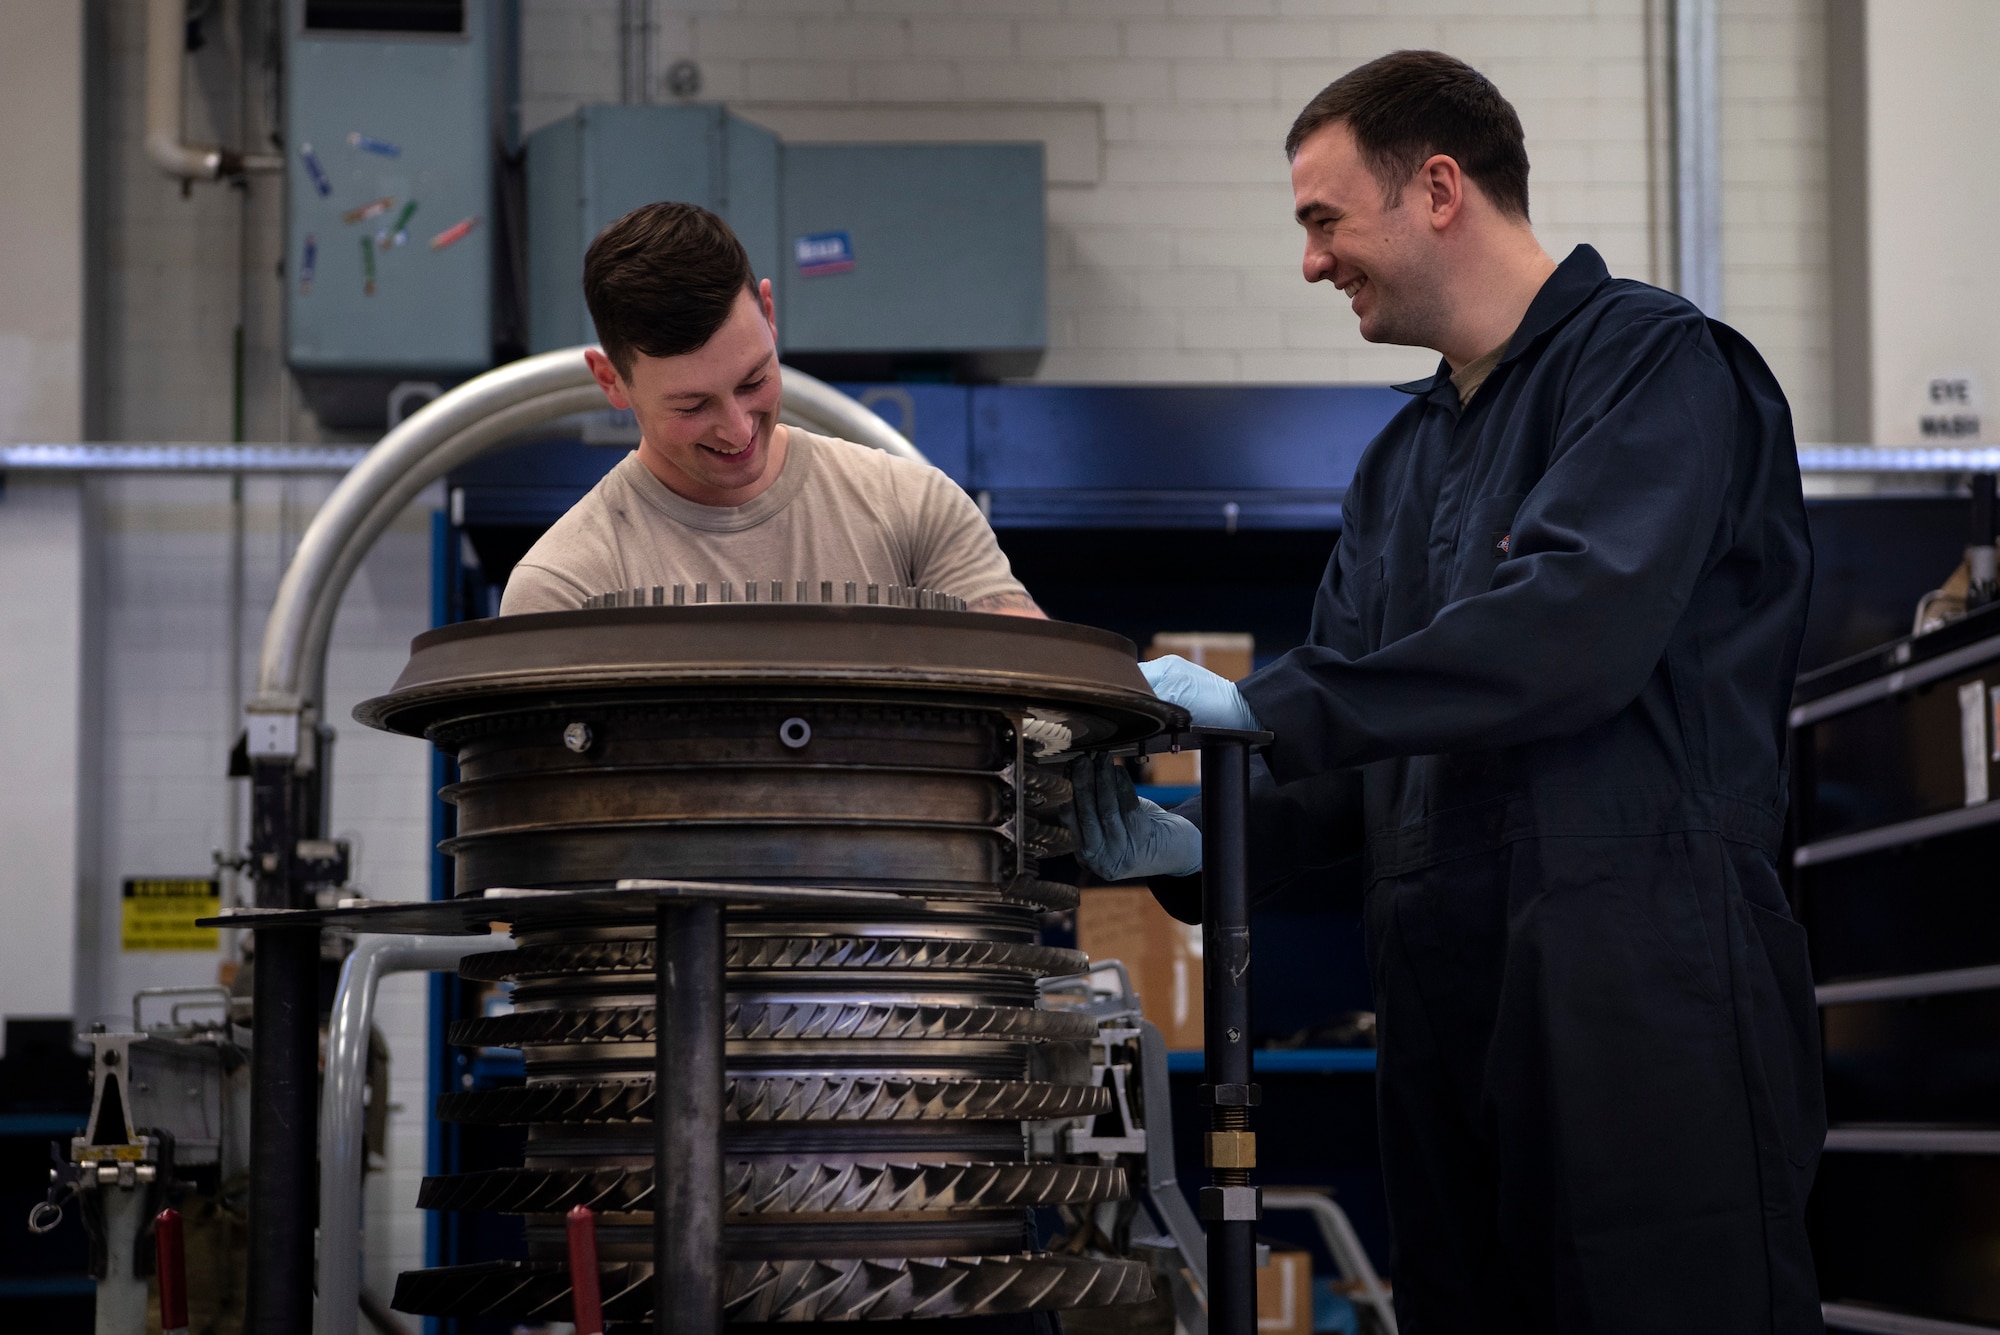 U.S. Air Force Staff Sgts. John Roberts and Taylor Bowes, both 52nd Maintenance Squadron aerospace propulsion craftsmen, build an F110-GE-100 jet engine compressor at Spangdahlem Air Base, Germany, Feb. 25, 2020. The propulsion flight is in charge of providing engines to multiple units, not just the 52nd Fighter Wing. GE-100 series engines are not used at Spangdahlem AB, but are sent to Aviano AB, Italy, and the U.S. Air Forces Central Command theater of operations. (U.S. Air Force photo by Airman 1st Class Valerie Seelye)